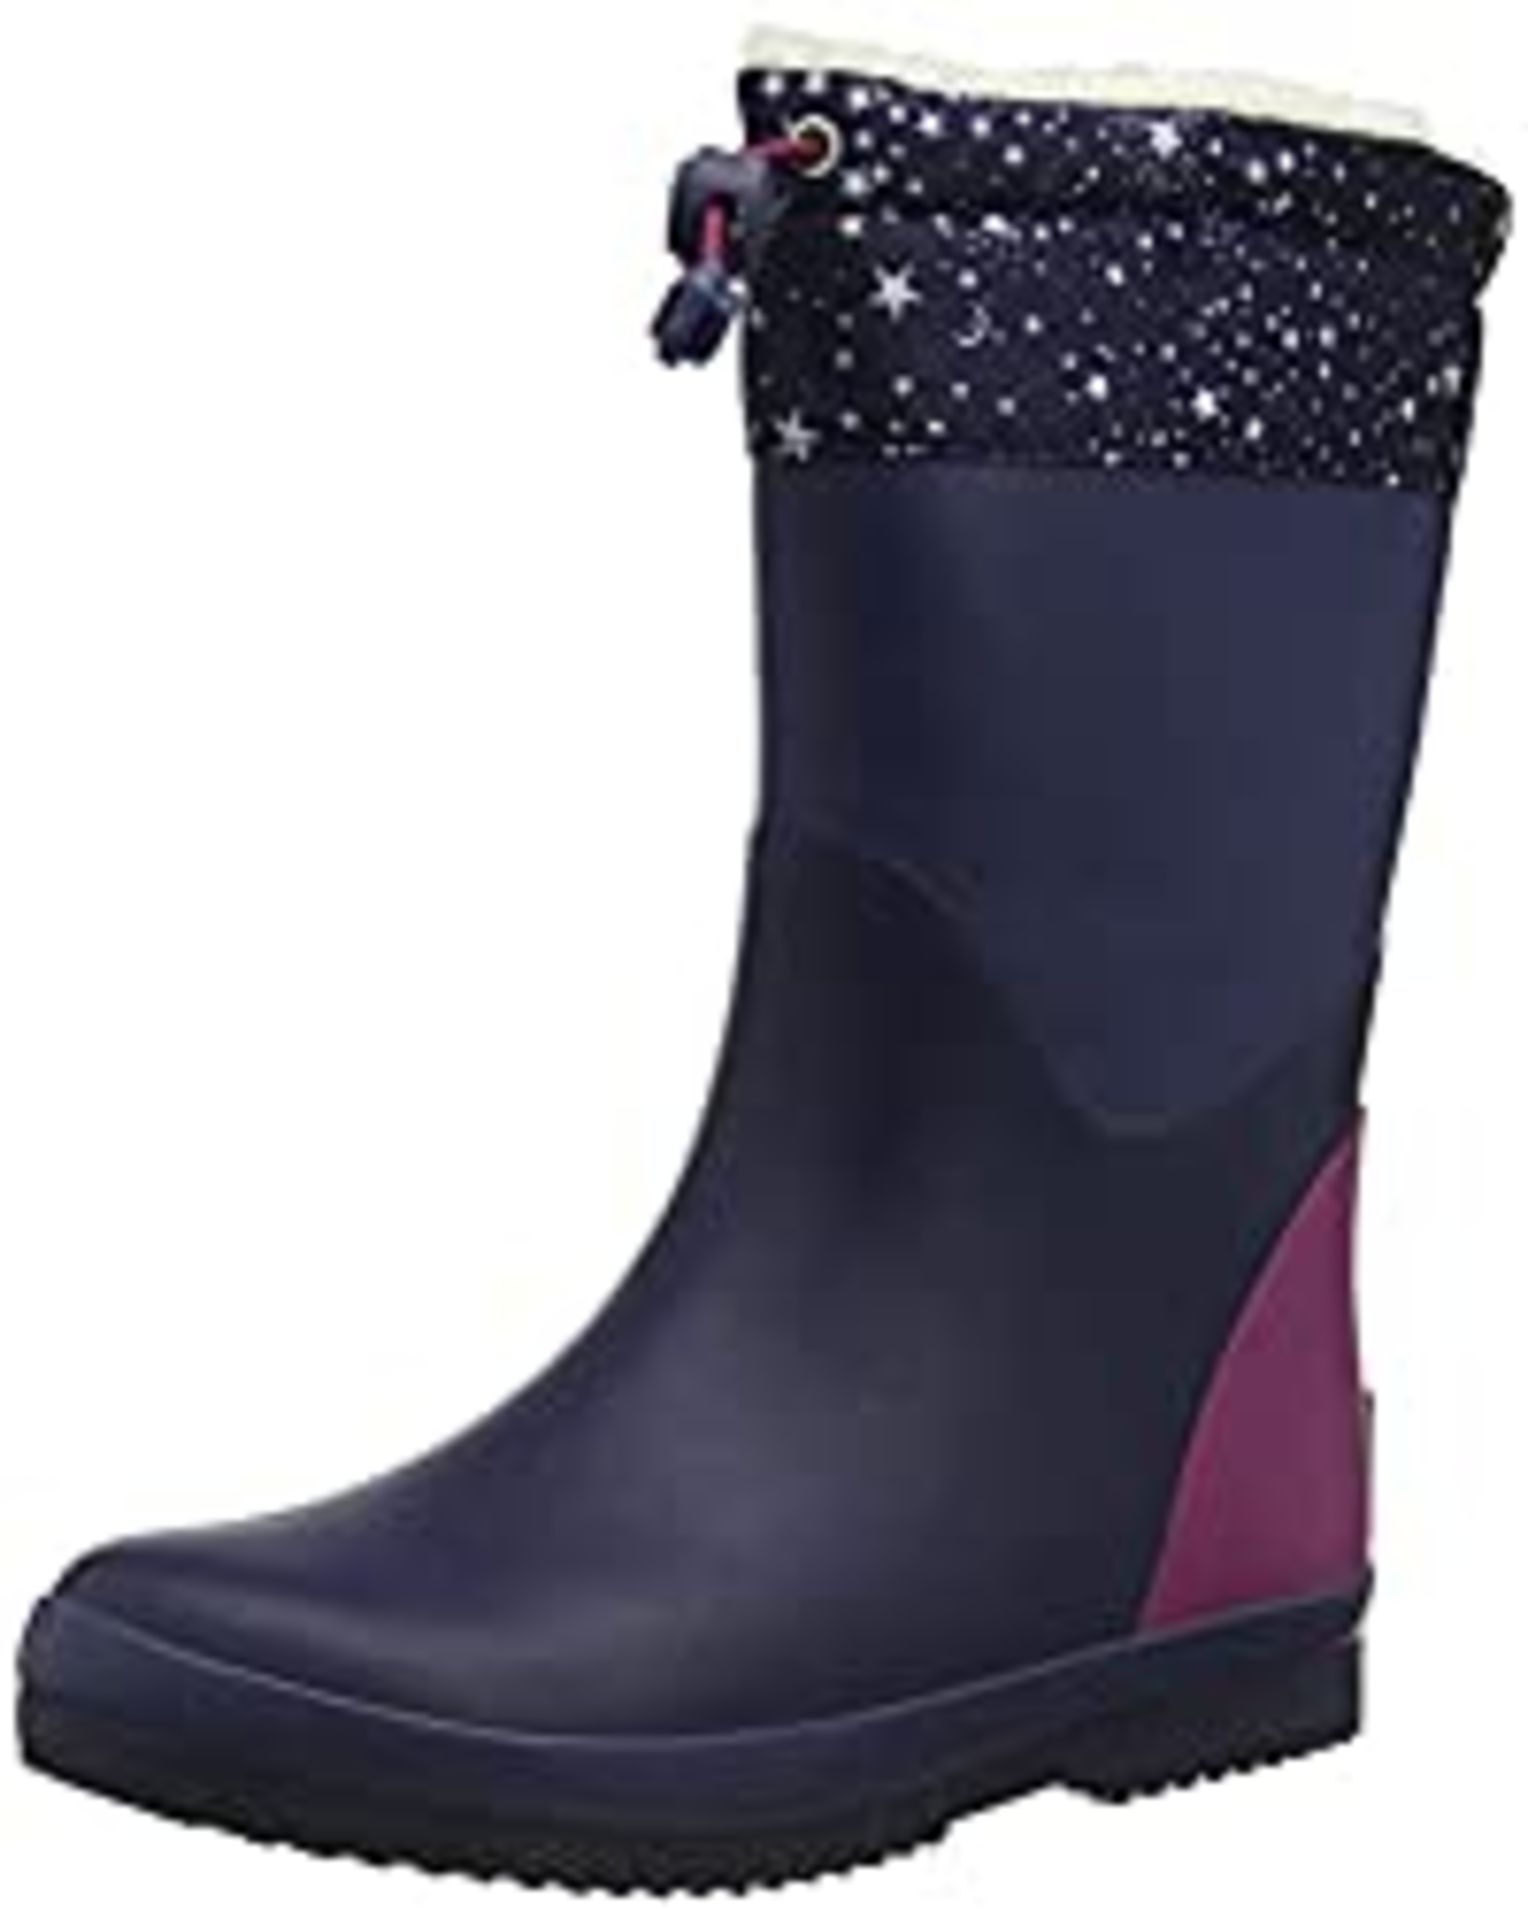 RRP £15.95 Joules Girl's Jnr Warm Welly Rain Boot,French Navy,3 UK